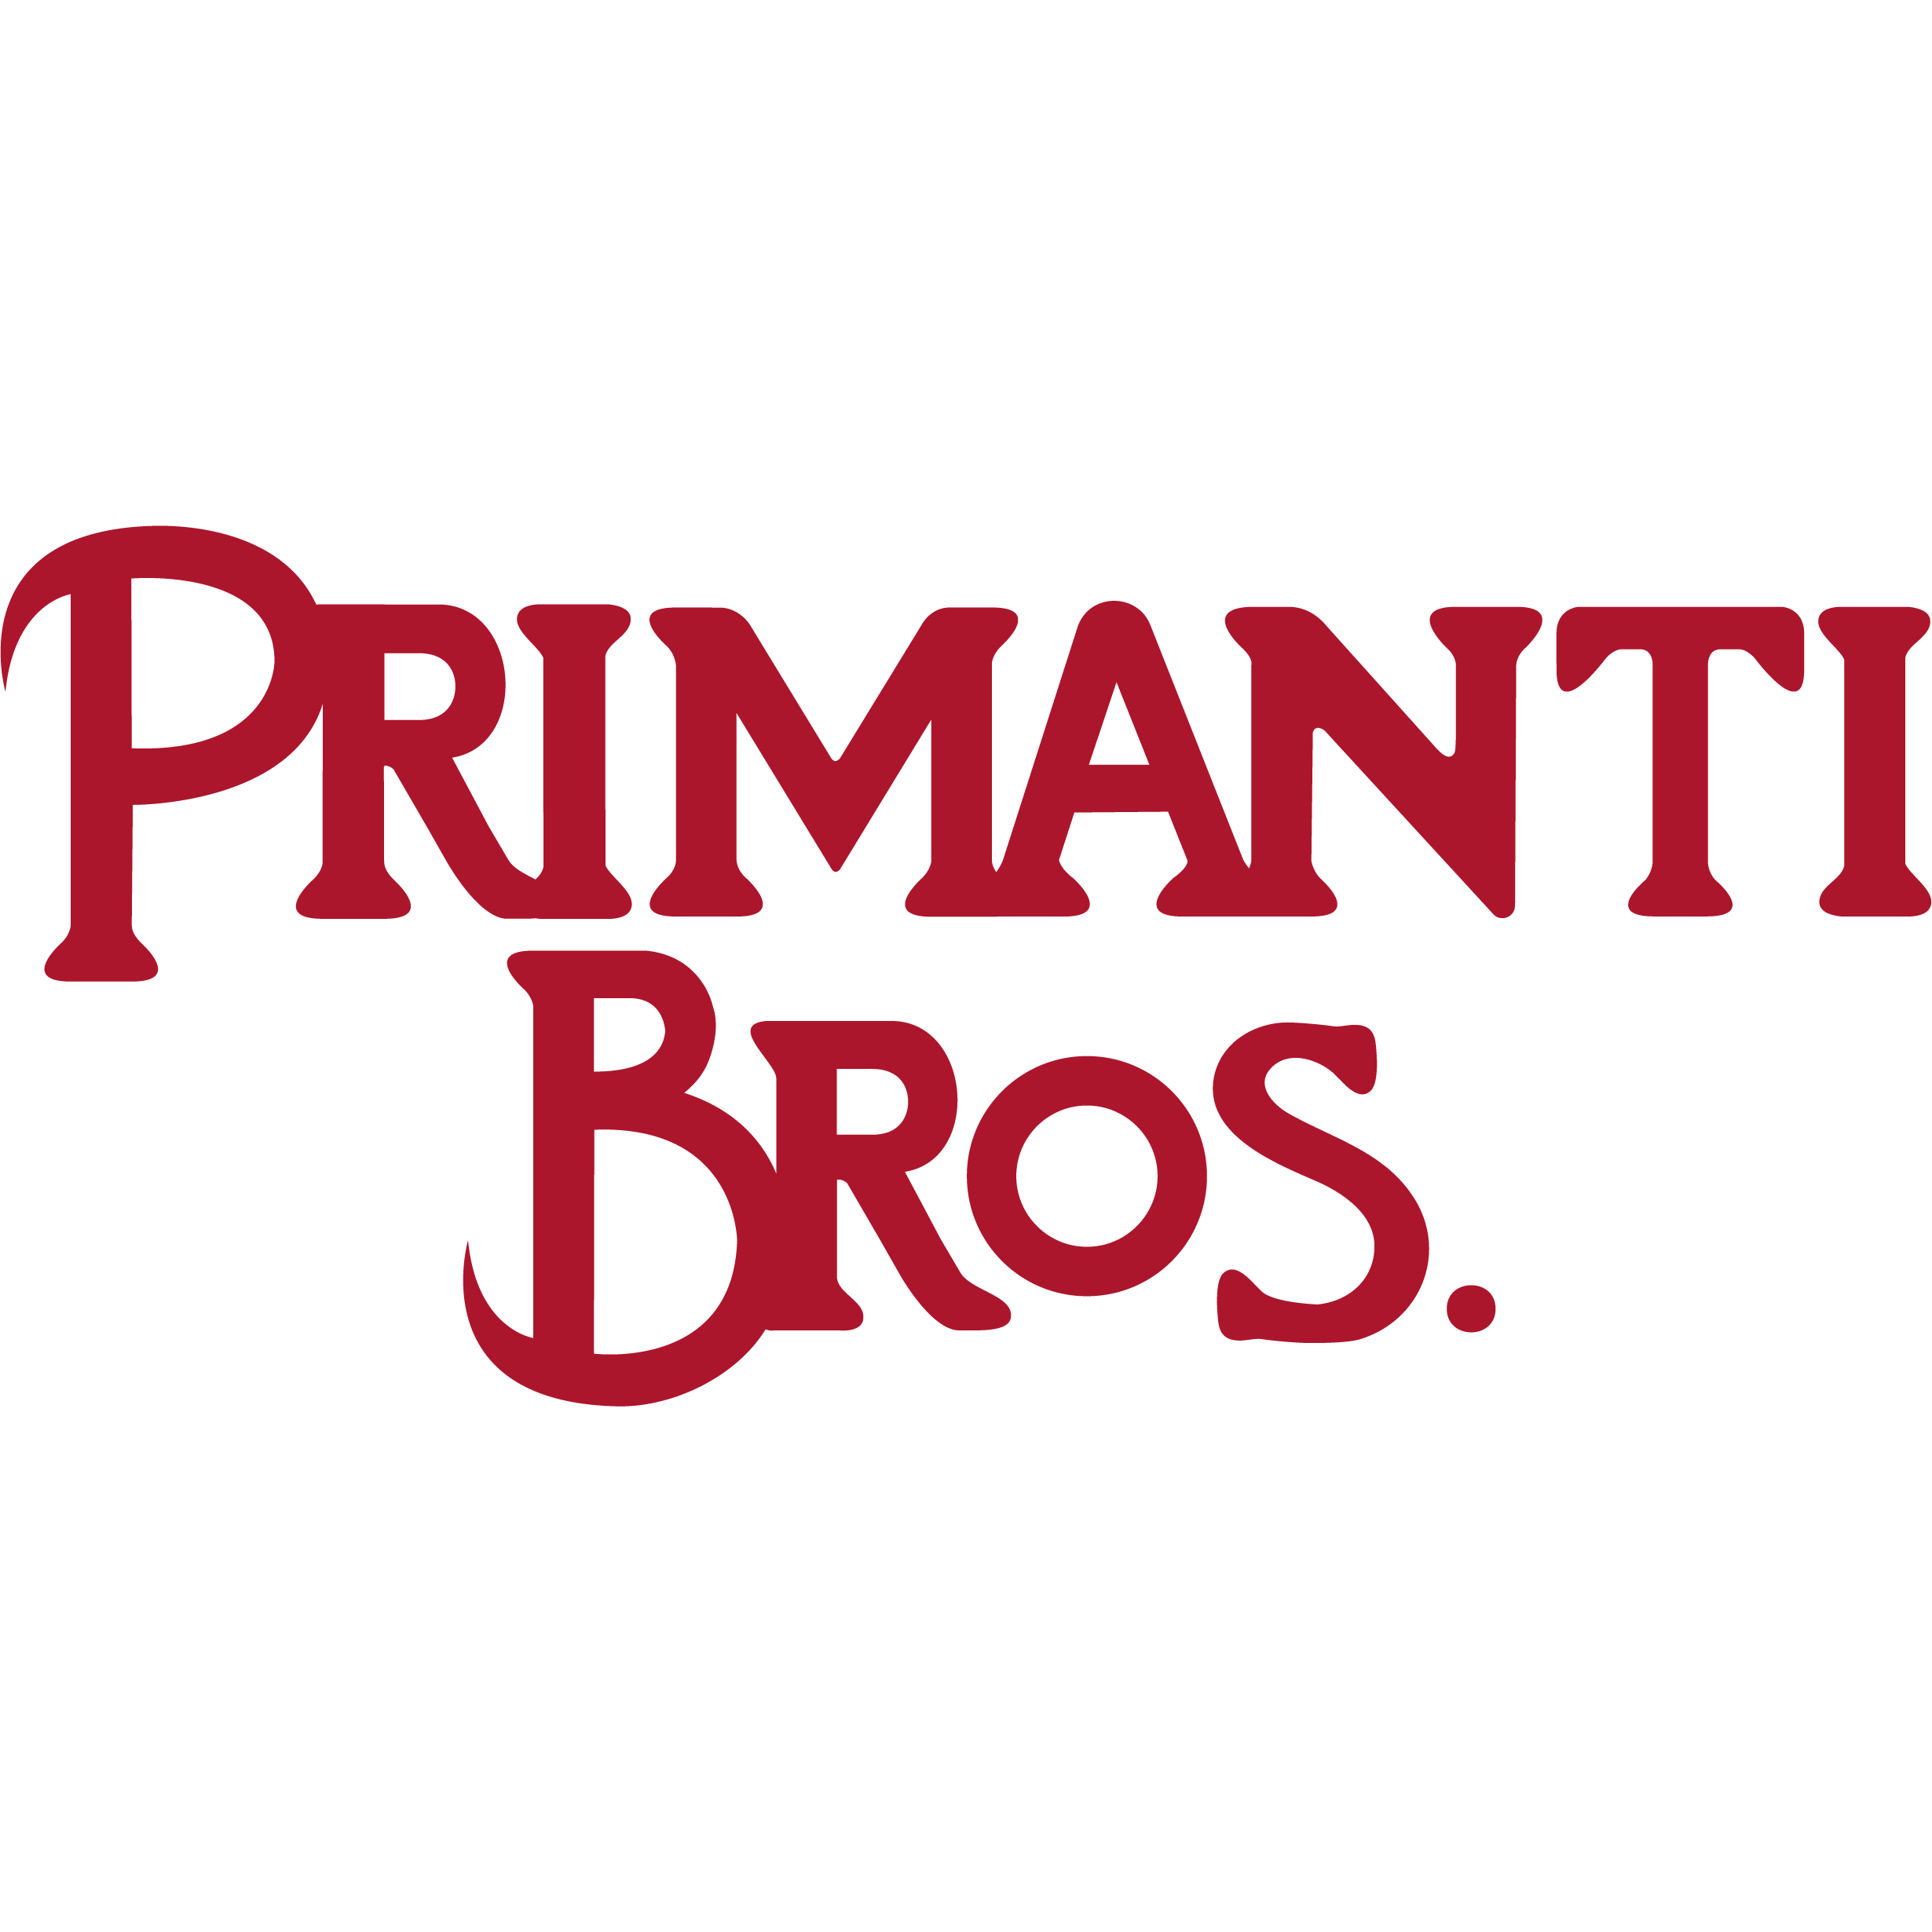 Primanti Bros. Restaurant and Bar - Hagerstown, MD 21740 - (301)228-0933 | ShowMeLocal.com